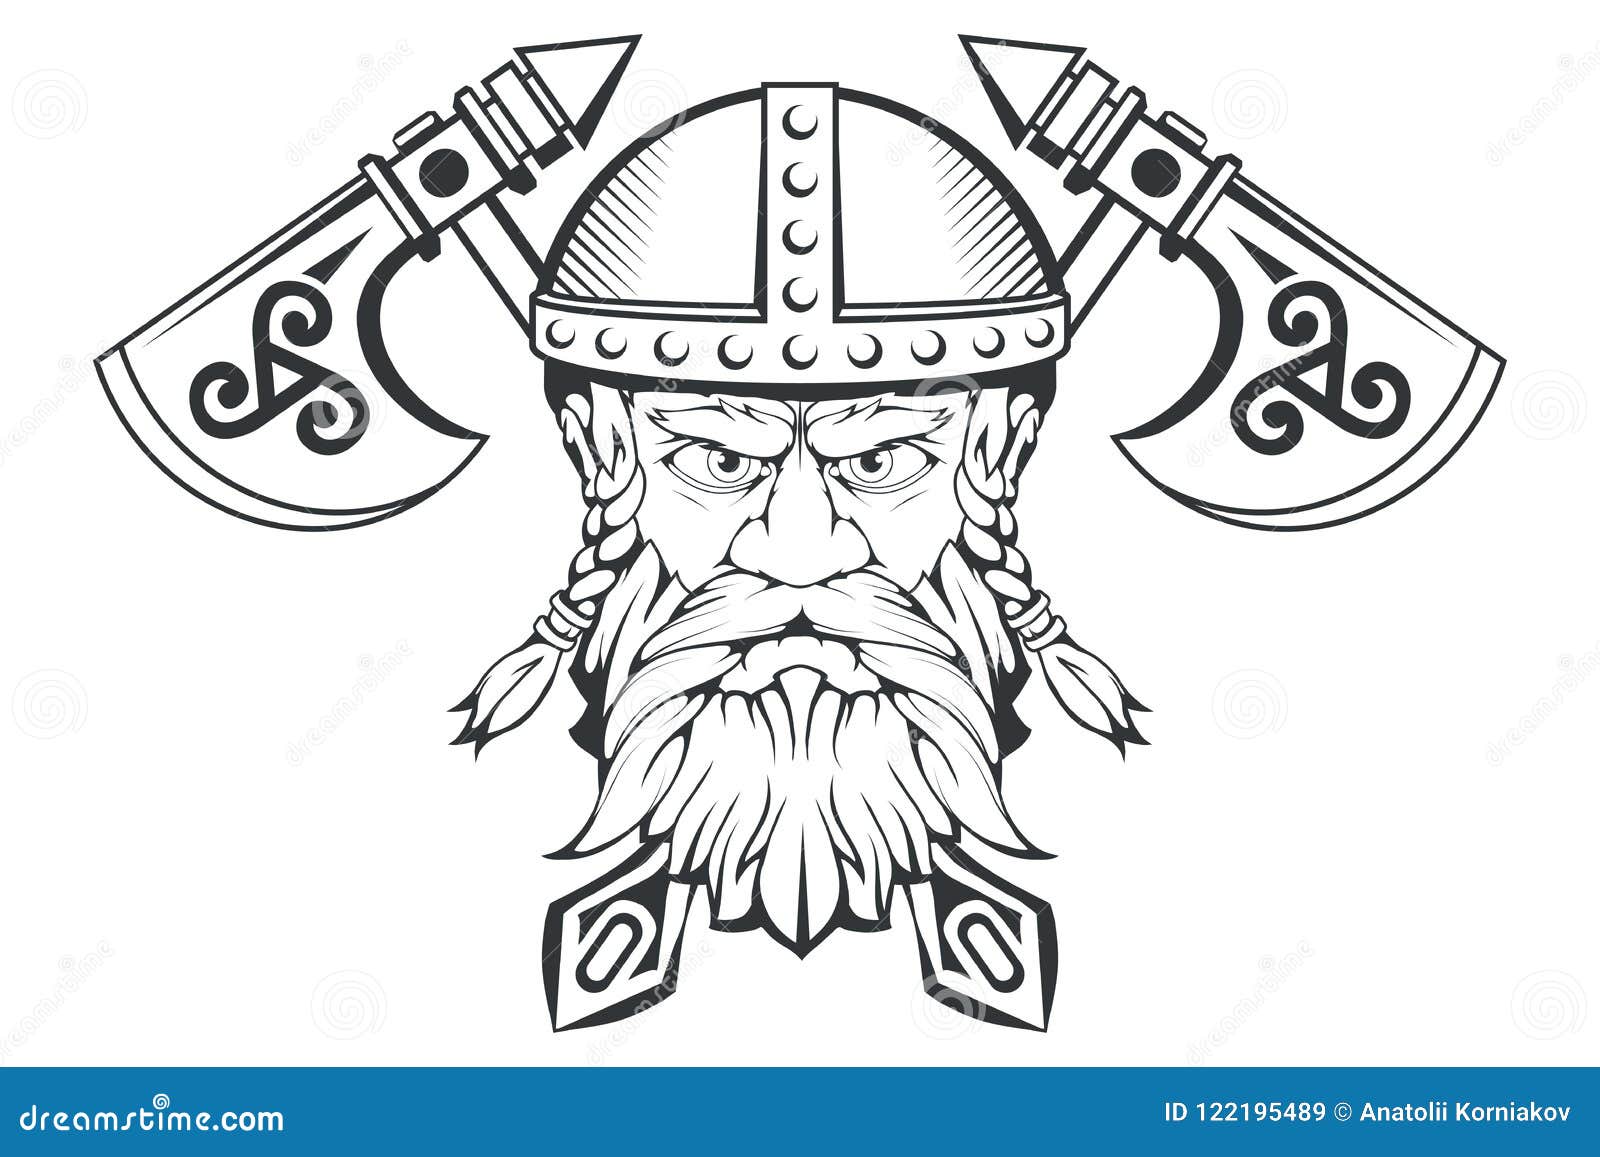 Hand Drawn Of A Viking In A Helmet. Scandinavian Traditional Weapons.  Cartoon Bearded Man Character. Viking Tattoo. Traditional Illustration  122195489 - Megapixl